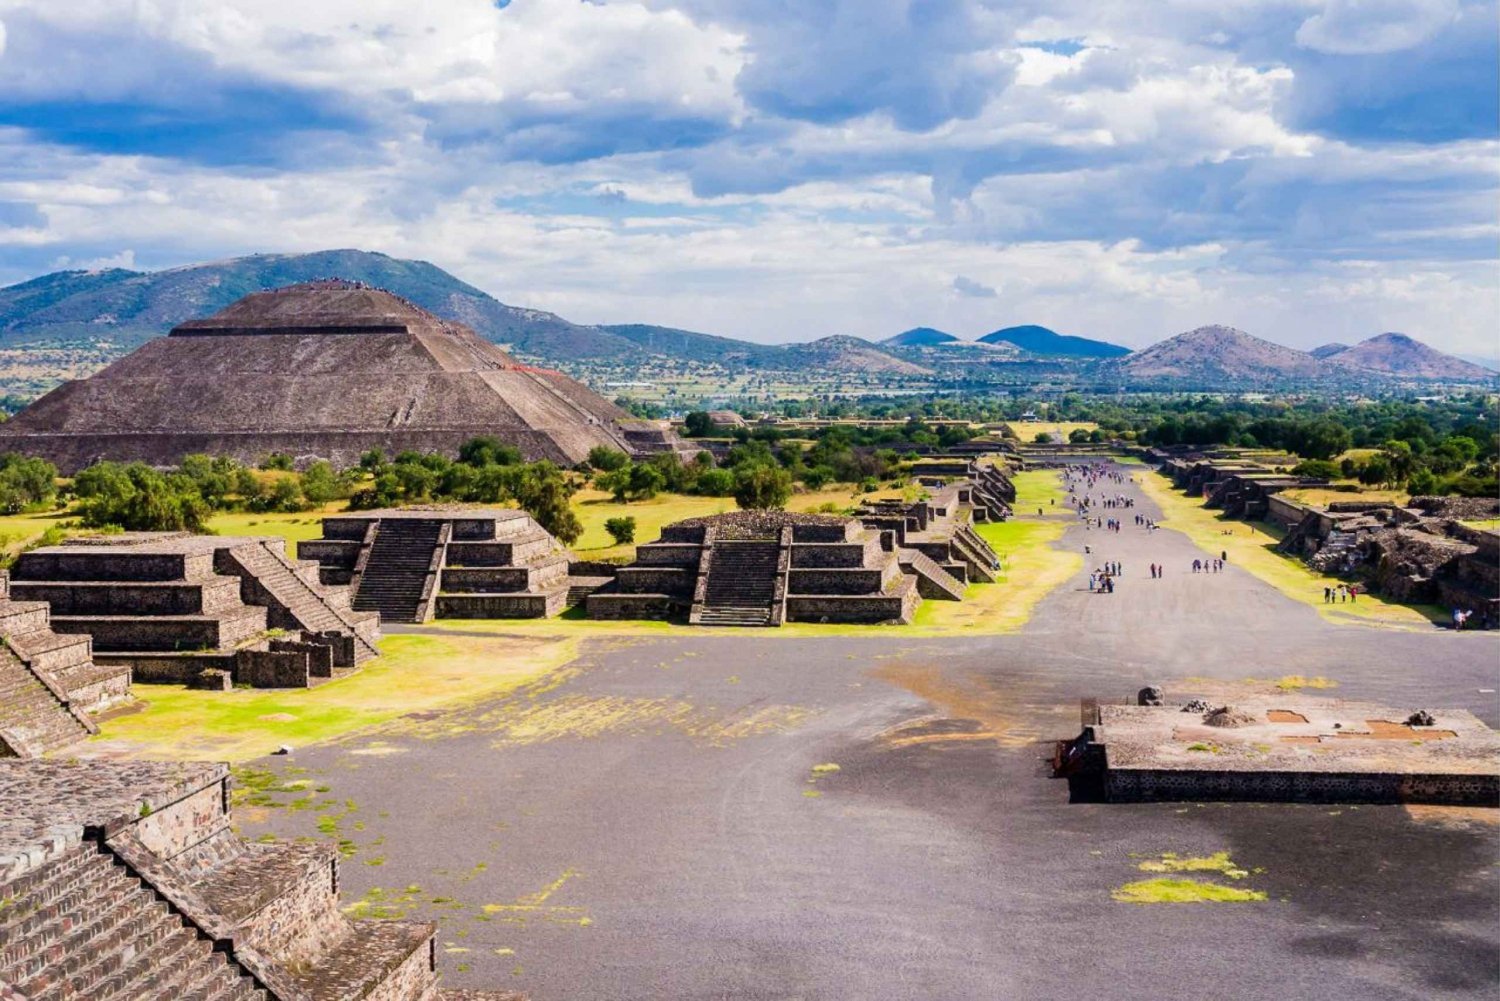 Mexico City: Teotihuacan, Shrine of Guadalupe & Tlatelolco